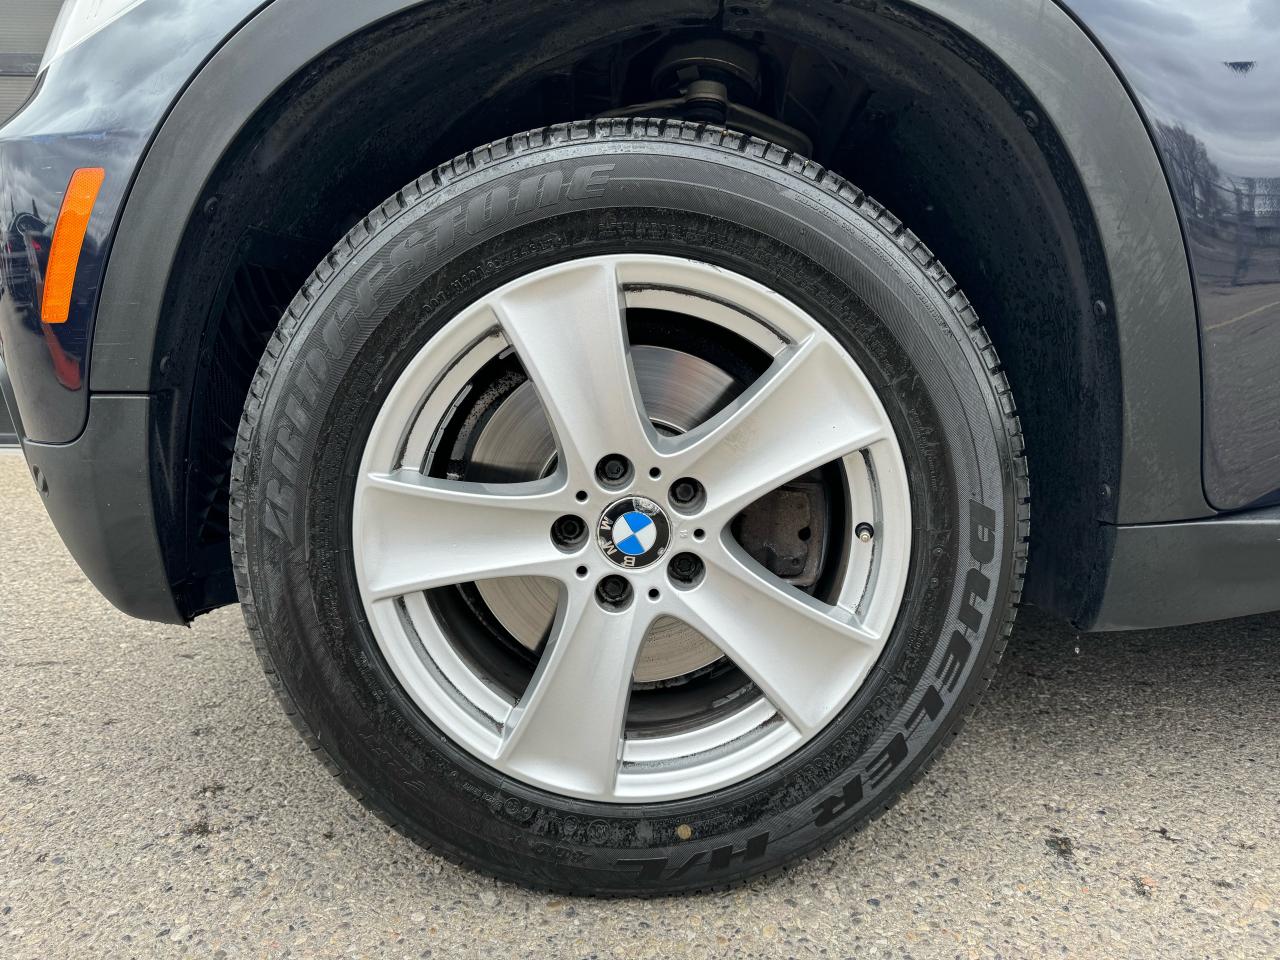 2009 BMW X5 AWD 4.8 1 Owner No Accidents - Photo #20